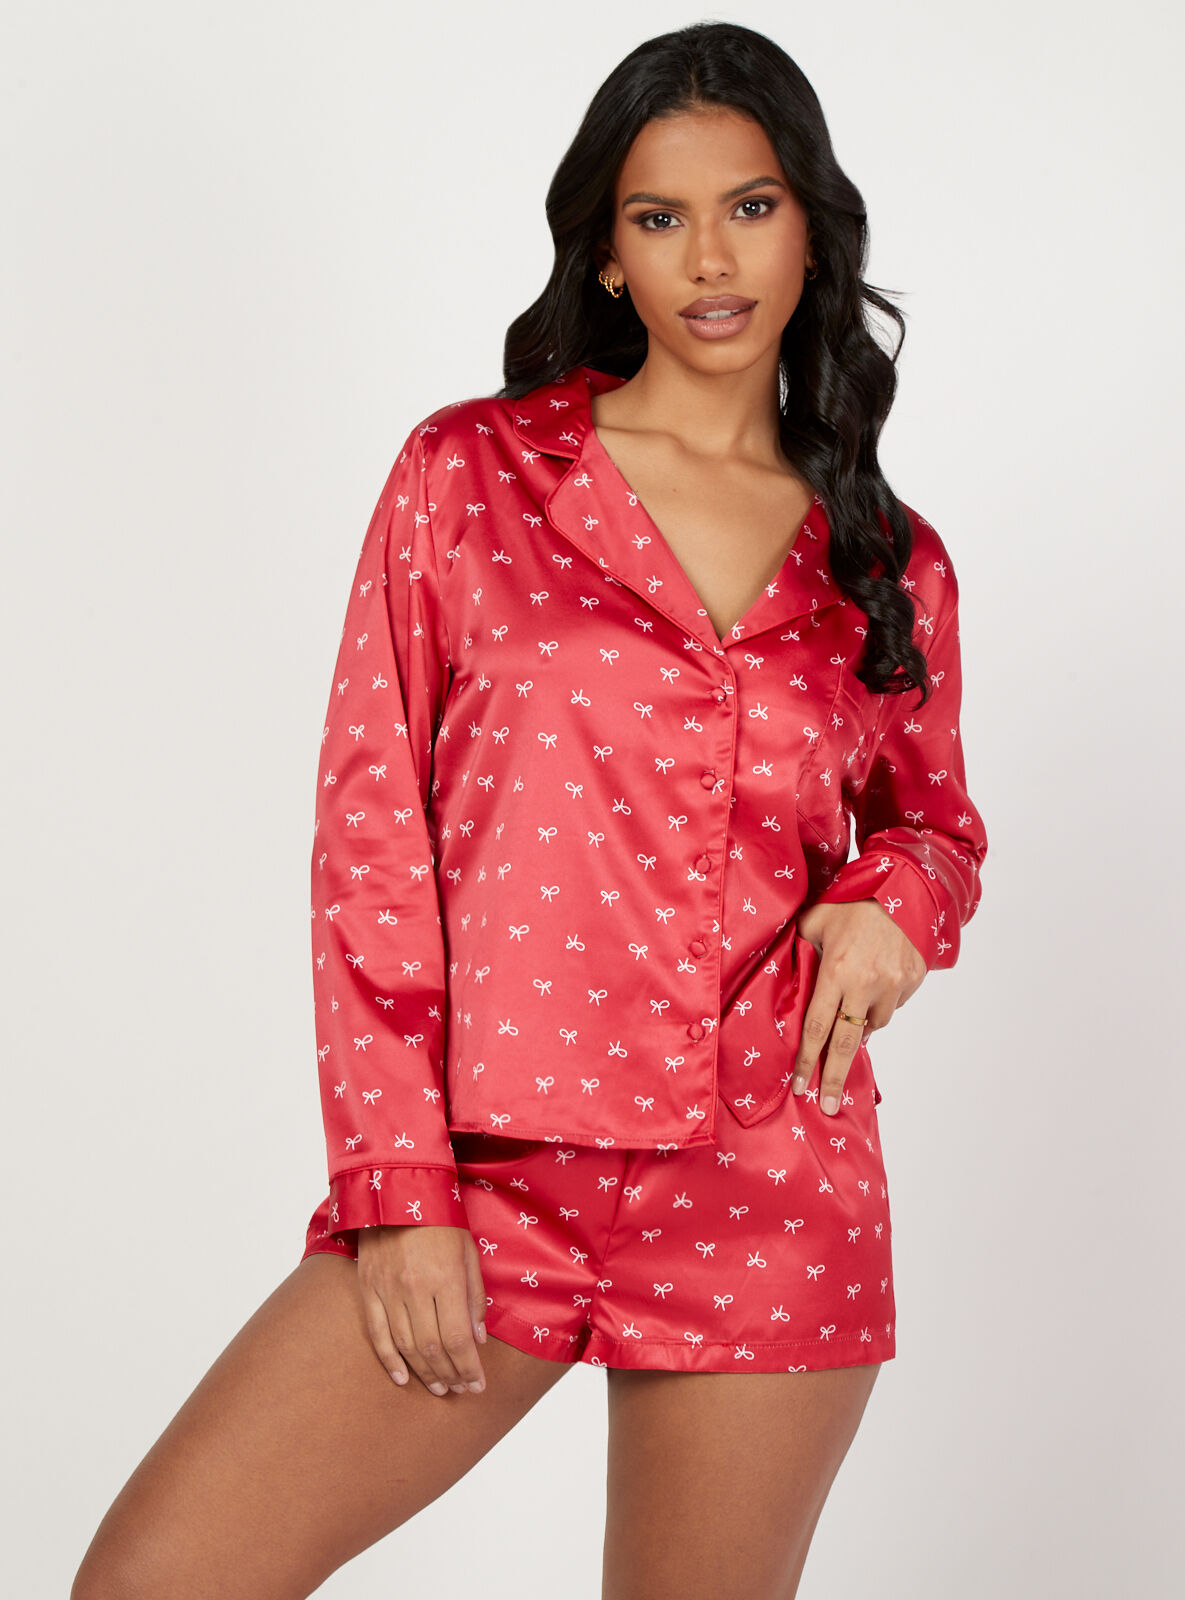 Boux Avenue Bow print satin revere and shorts set - Red Mix - 08